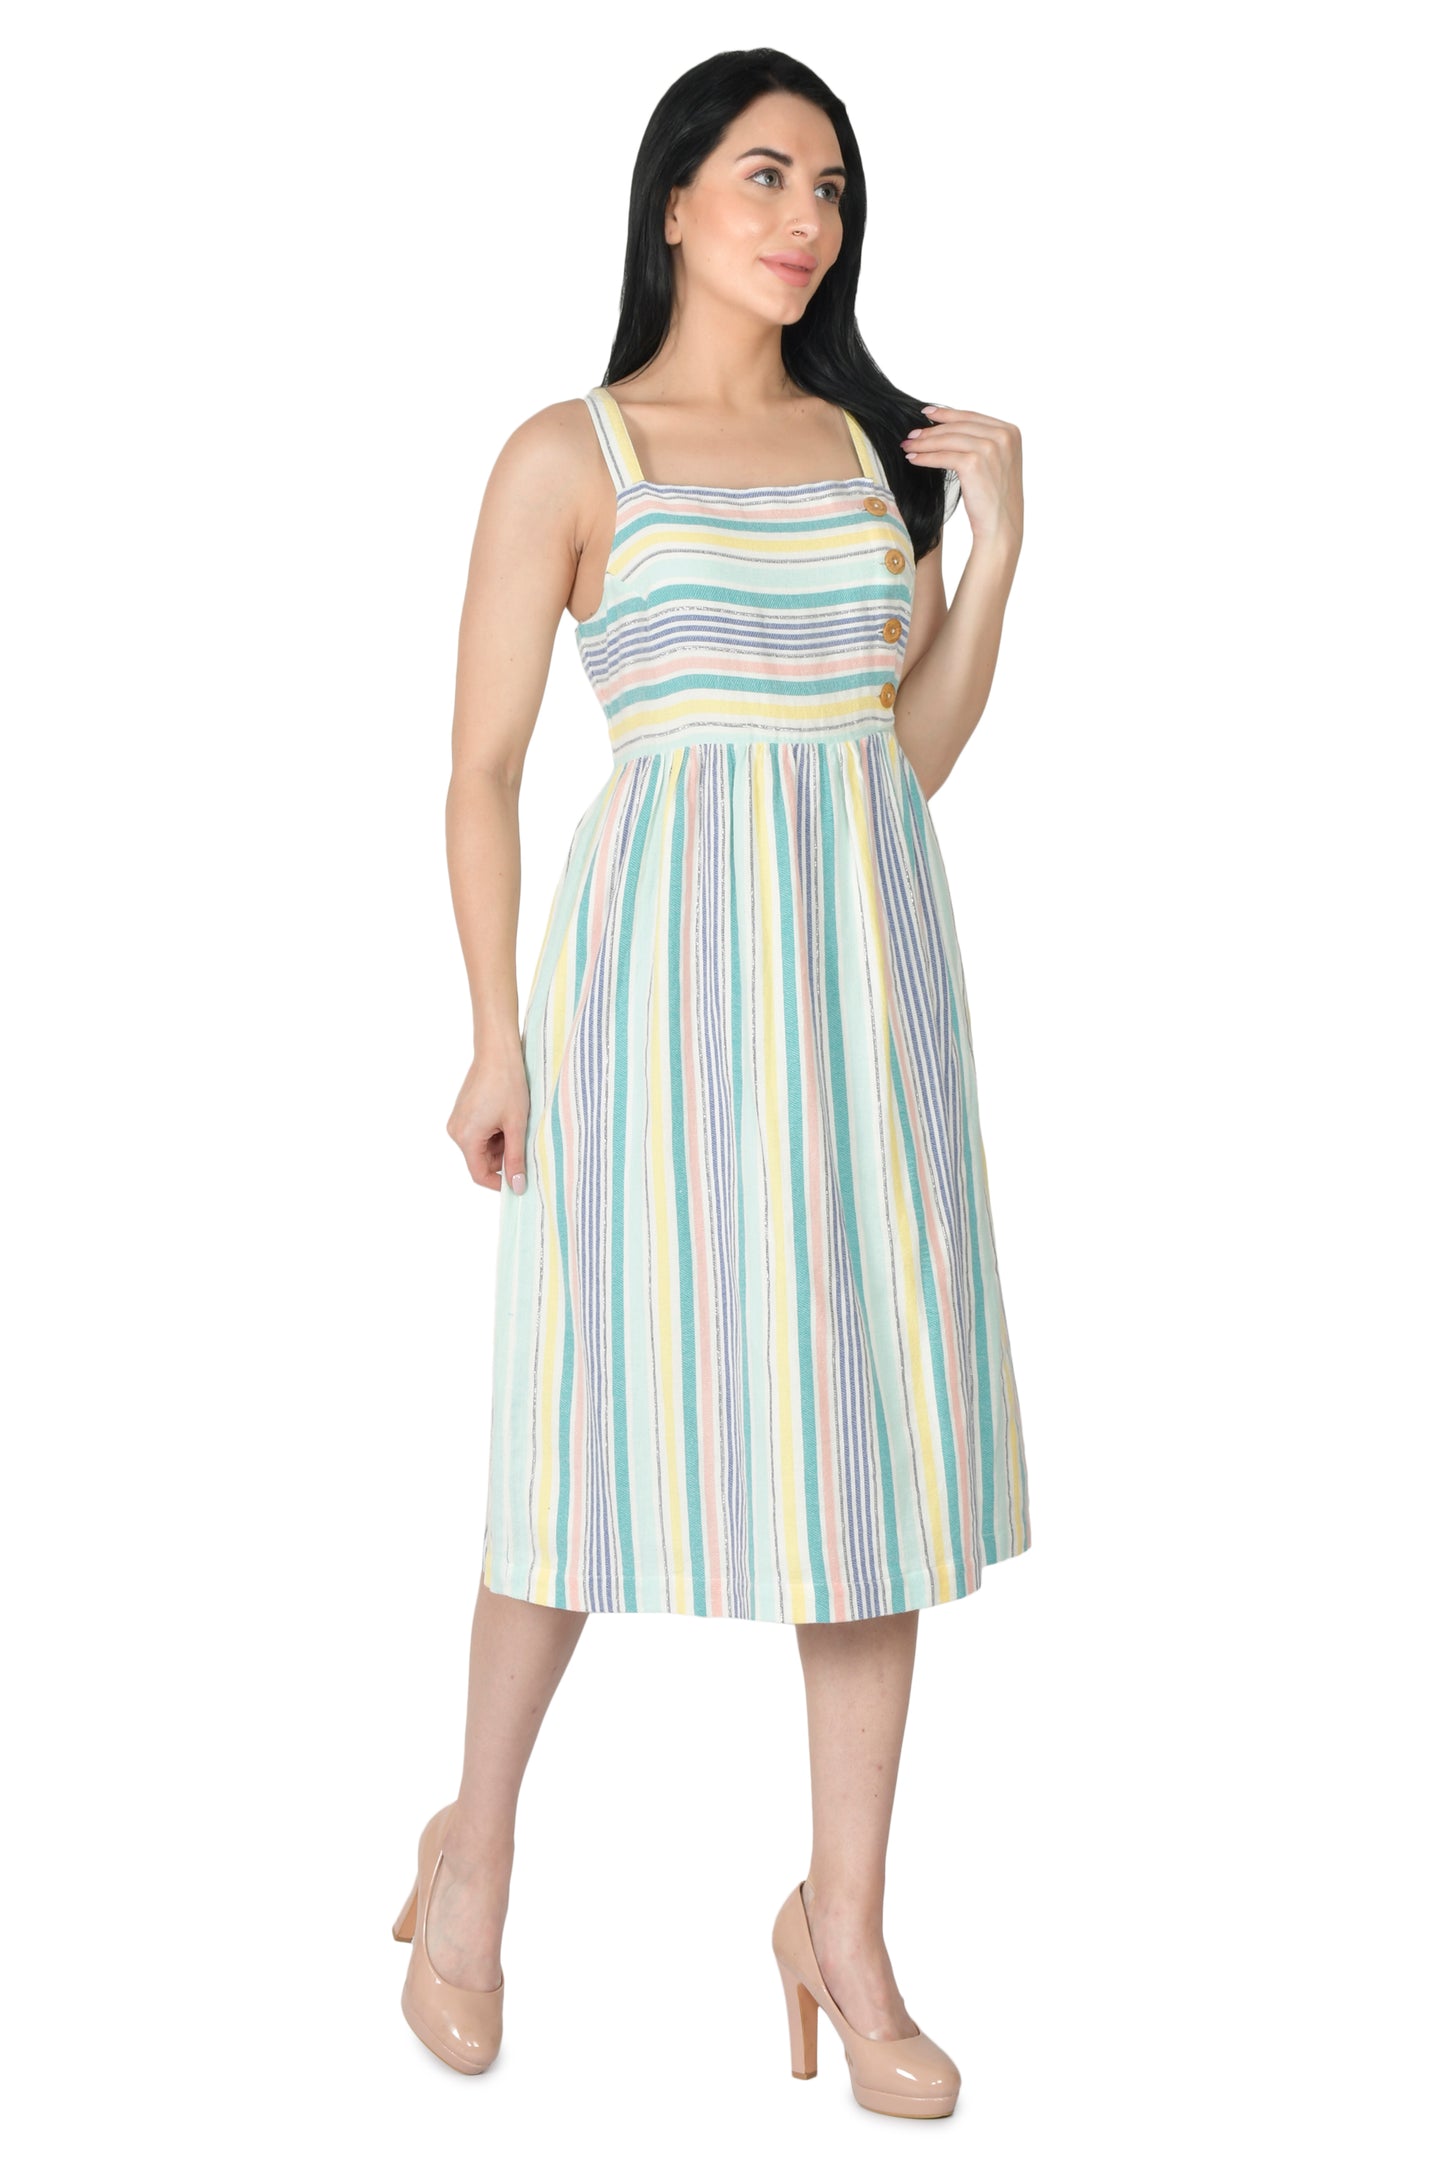 PASTEL LUREX STRIPED LADIES DRESS WITH WOODEN BUTTONS